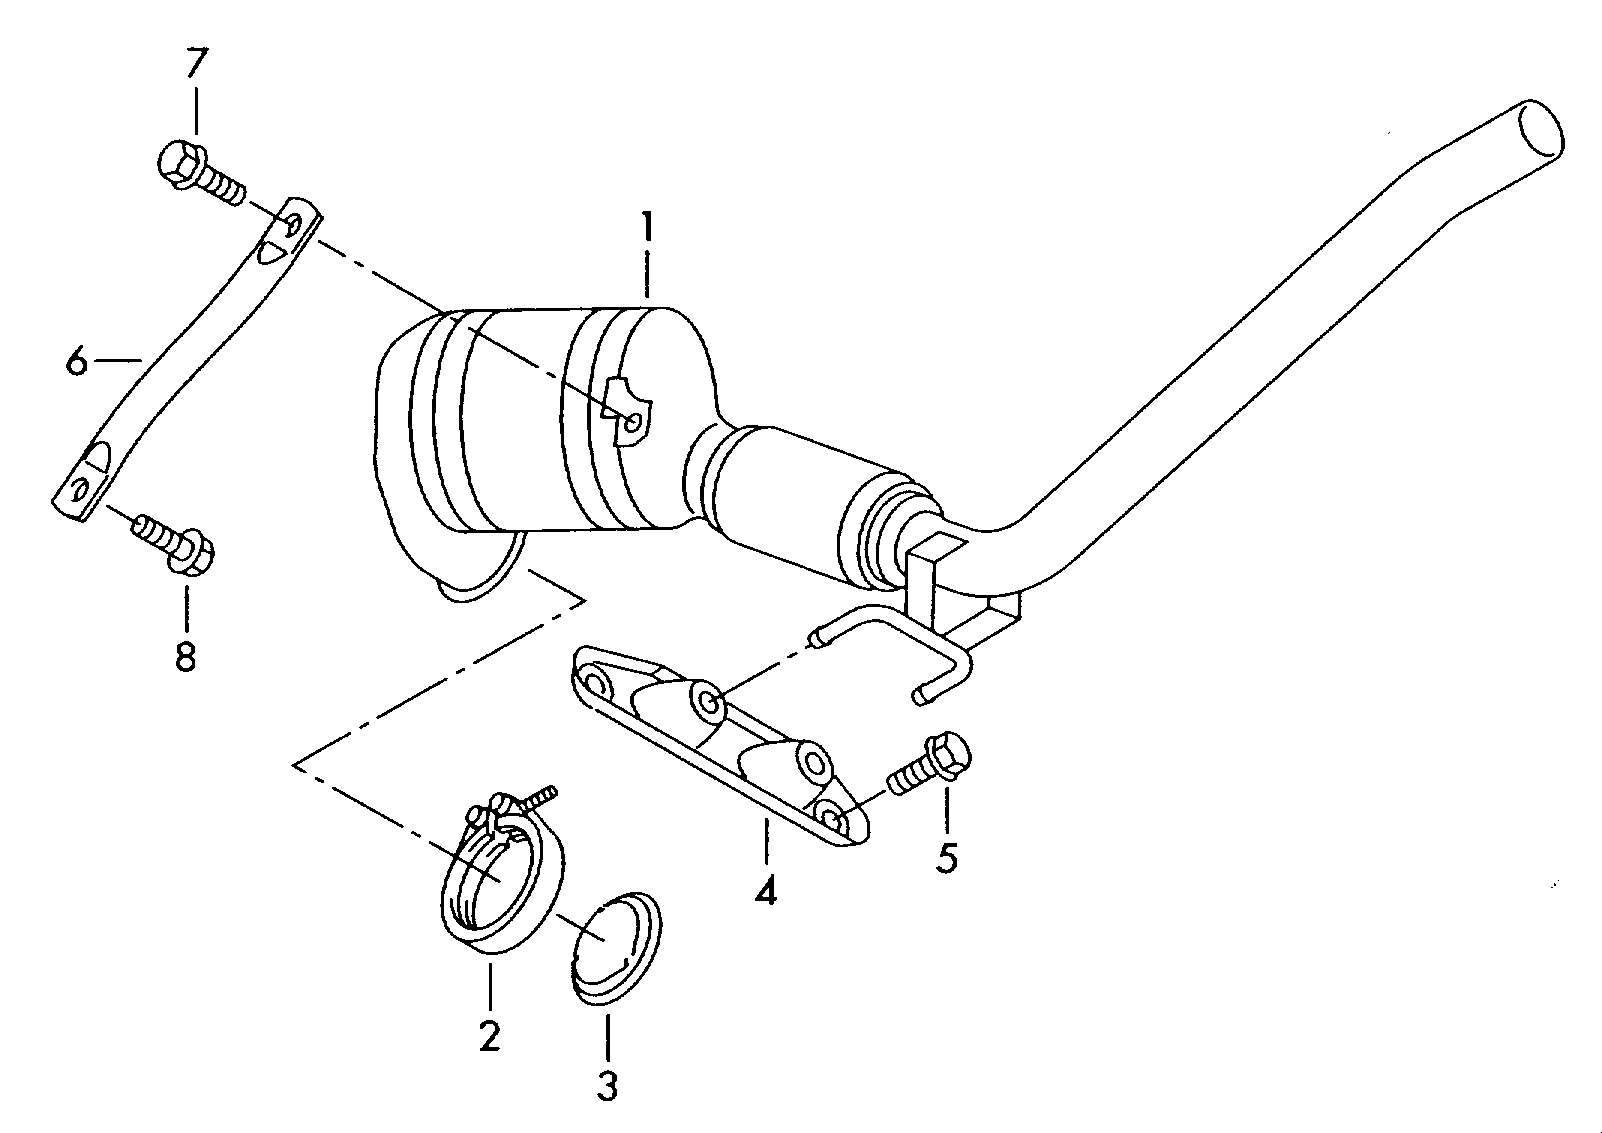 Exhaust pipe with catalystRetrofit kit for<br>diesel particulate filter             see illustration: 1.9/2.0ltr.<br> 097-010 - Golf Plus - gopl